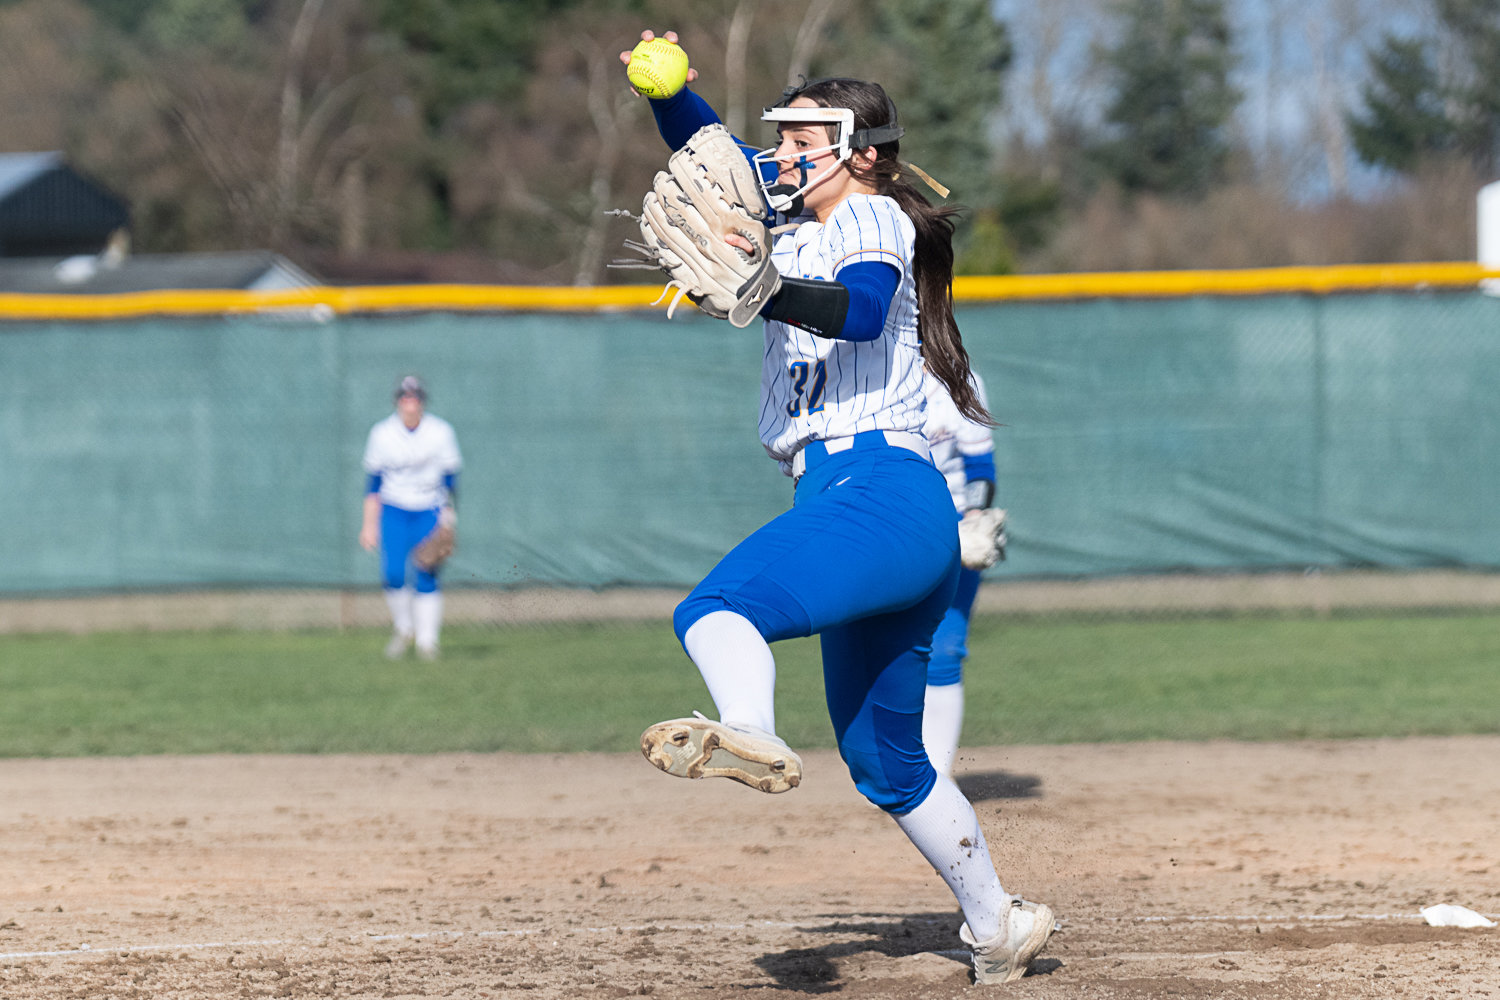 Layna Demers fires a pitch during Rochester's 5-3 loss to Tumwater on March 29.